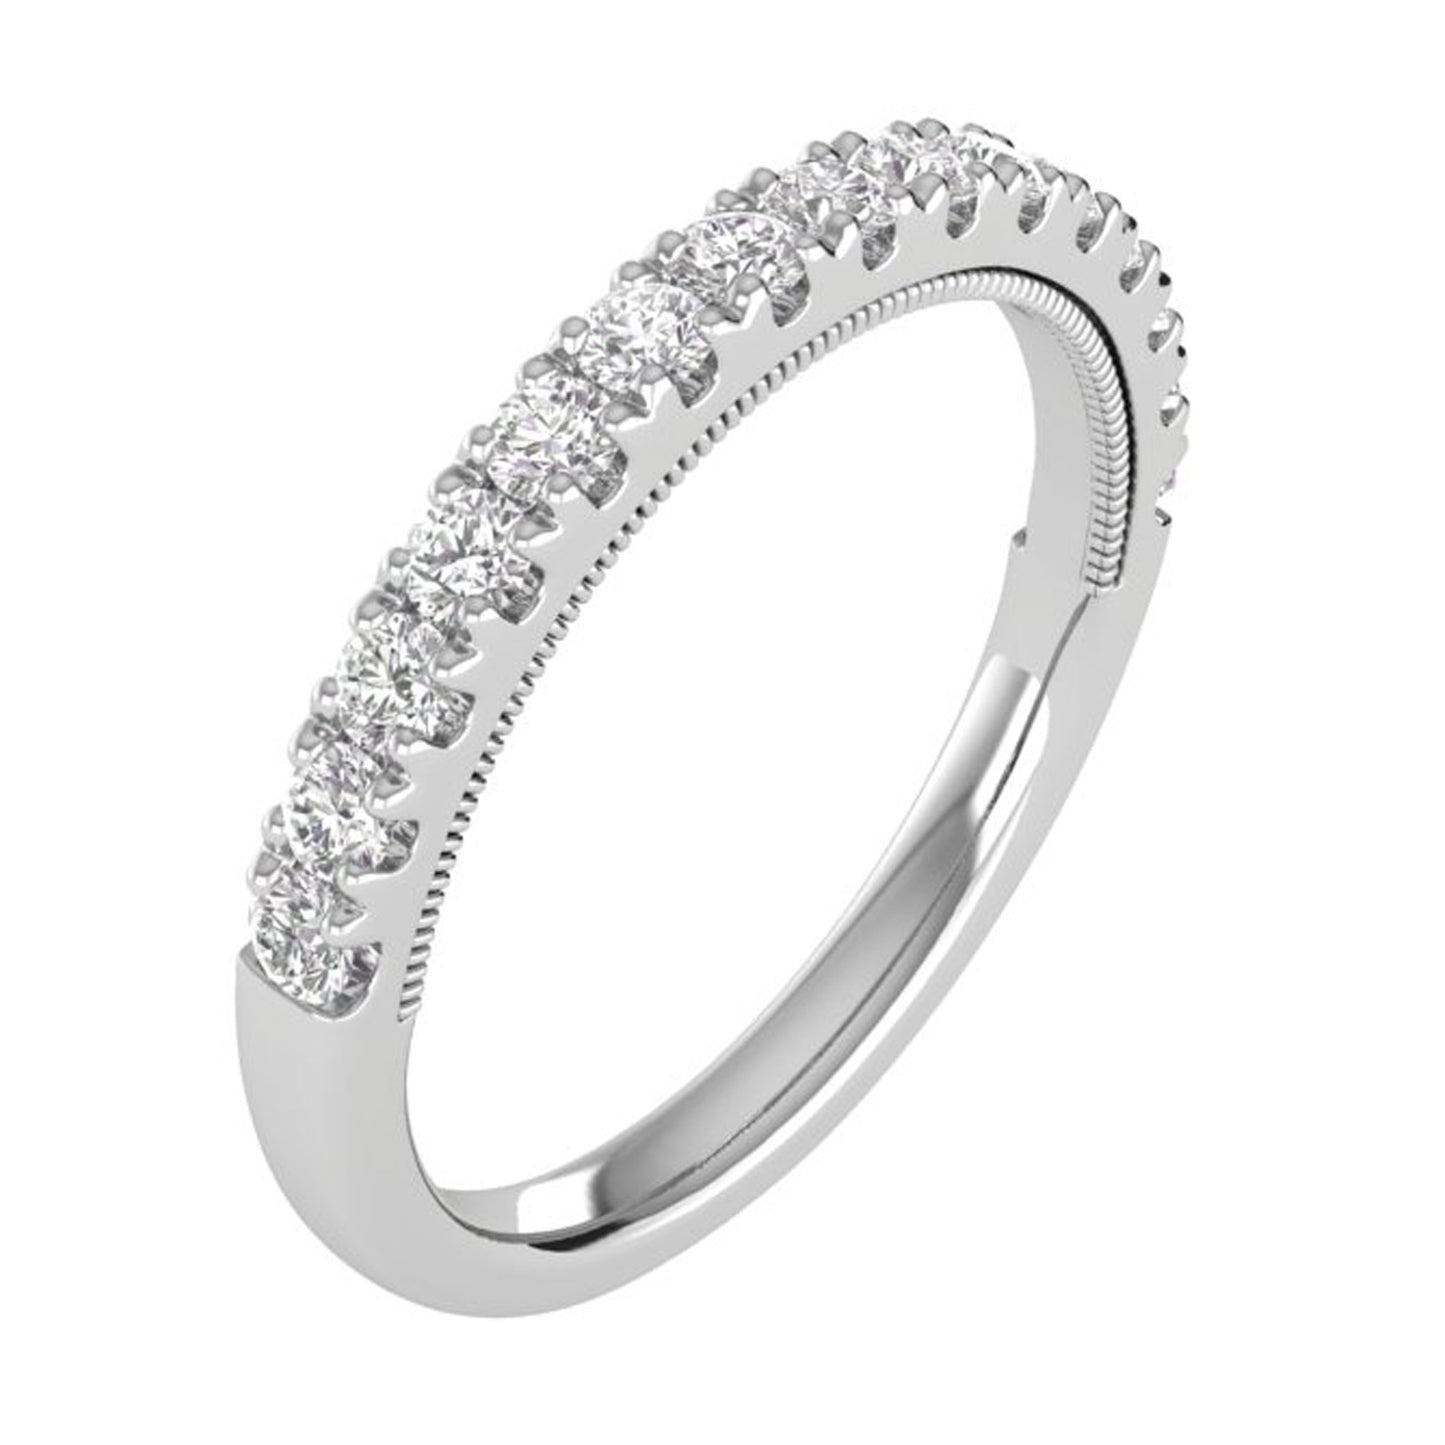 1/2 CTW COLORLESS FLAWLESS FRENCH PAVÉ WITH MILGRAIN WEDDING BAND